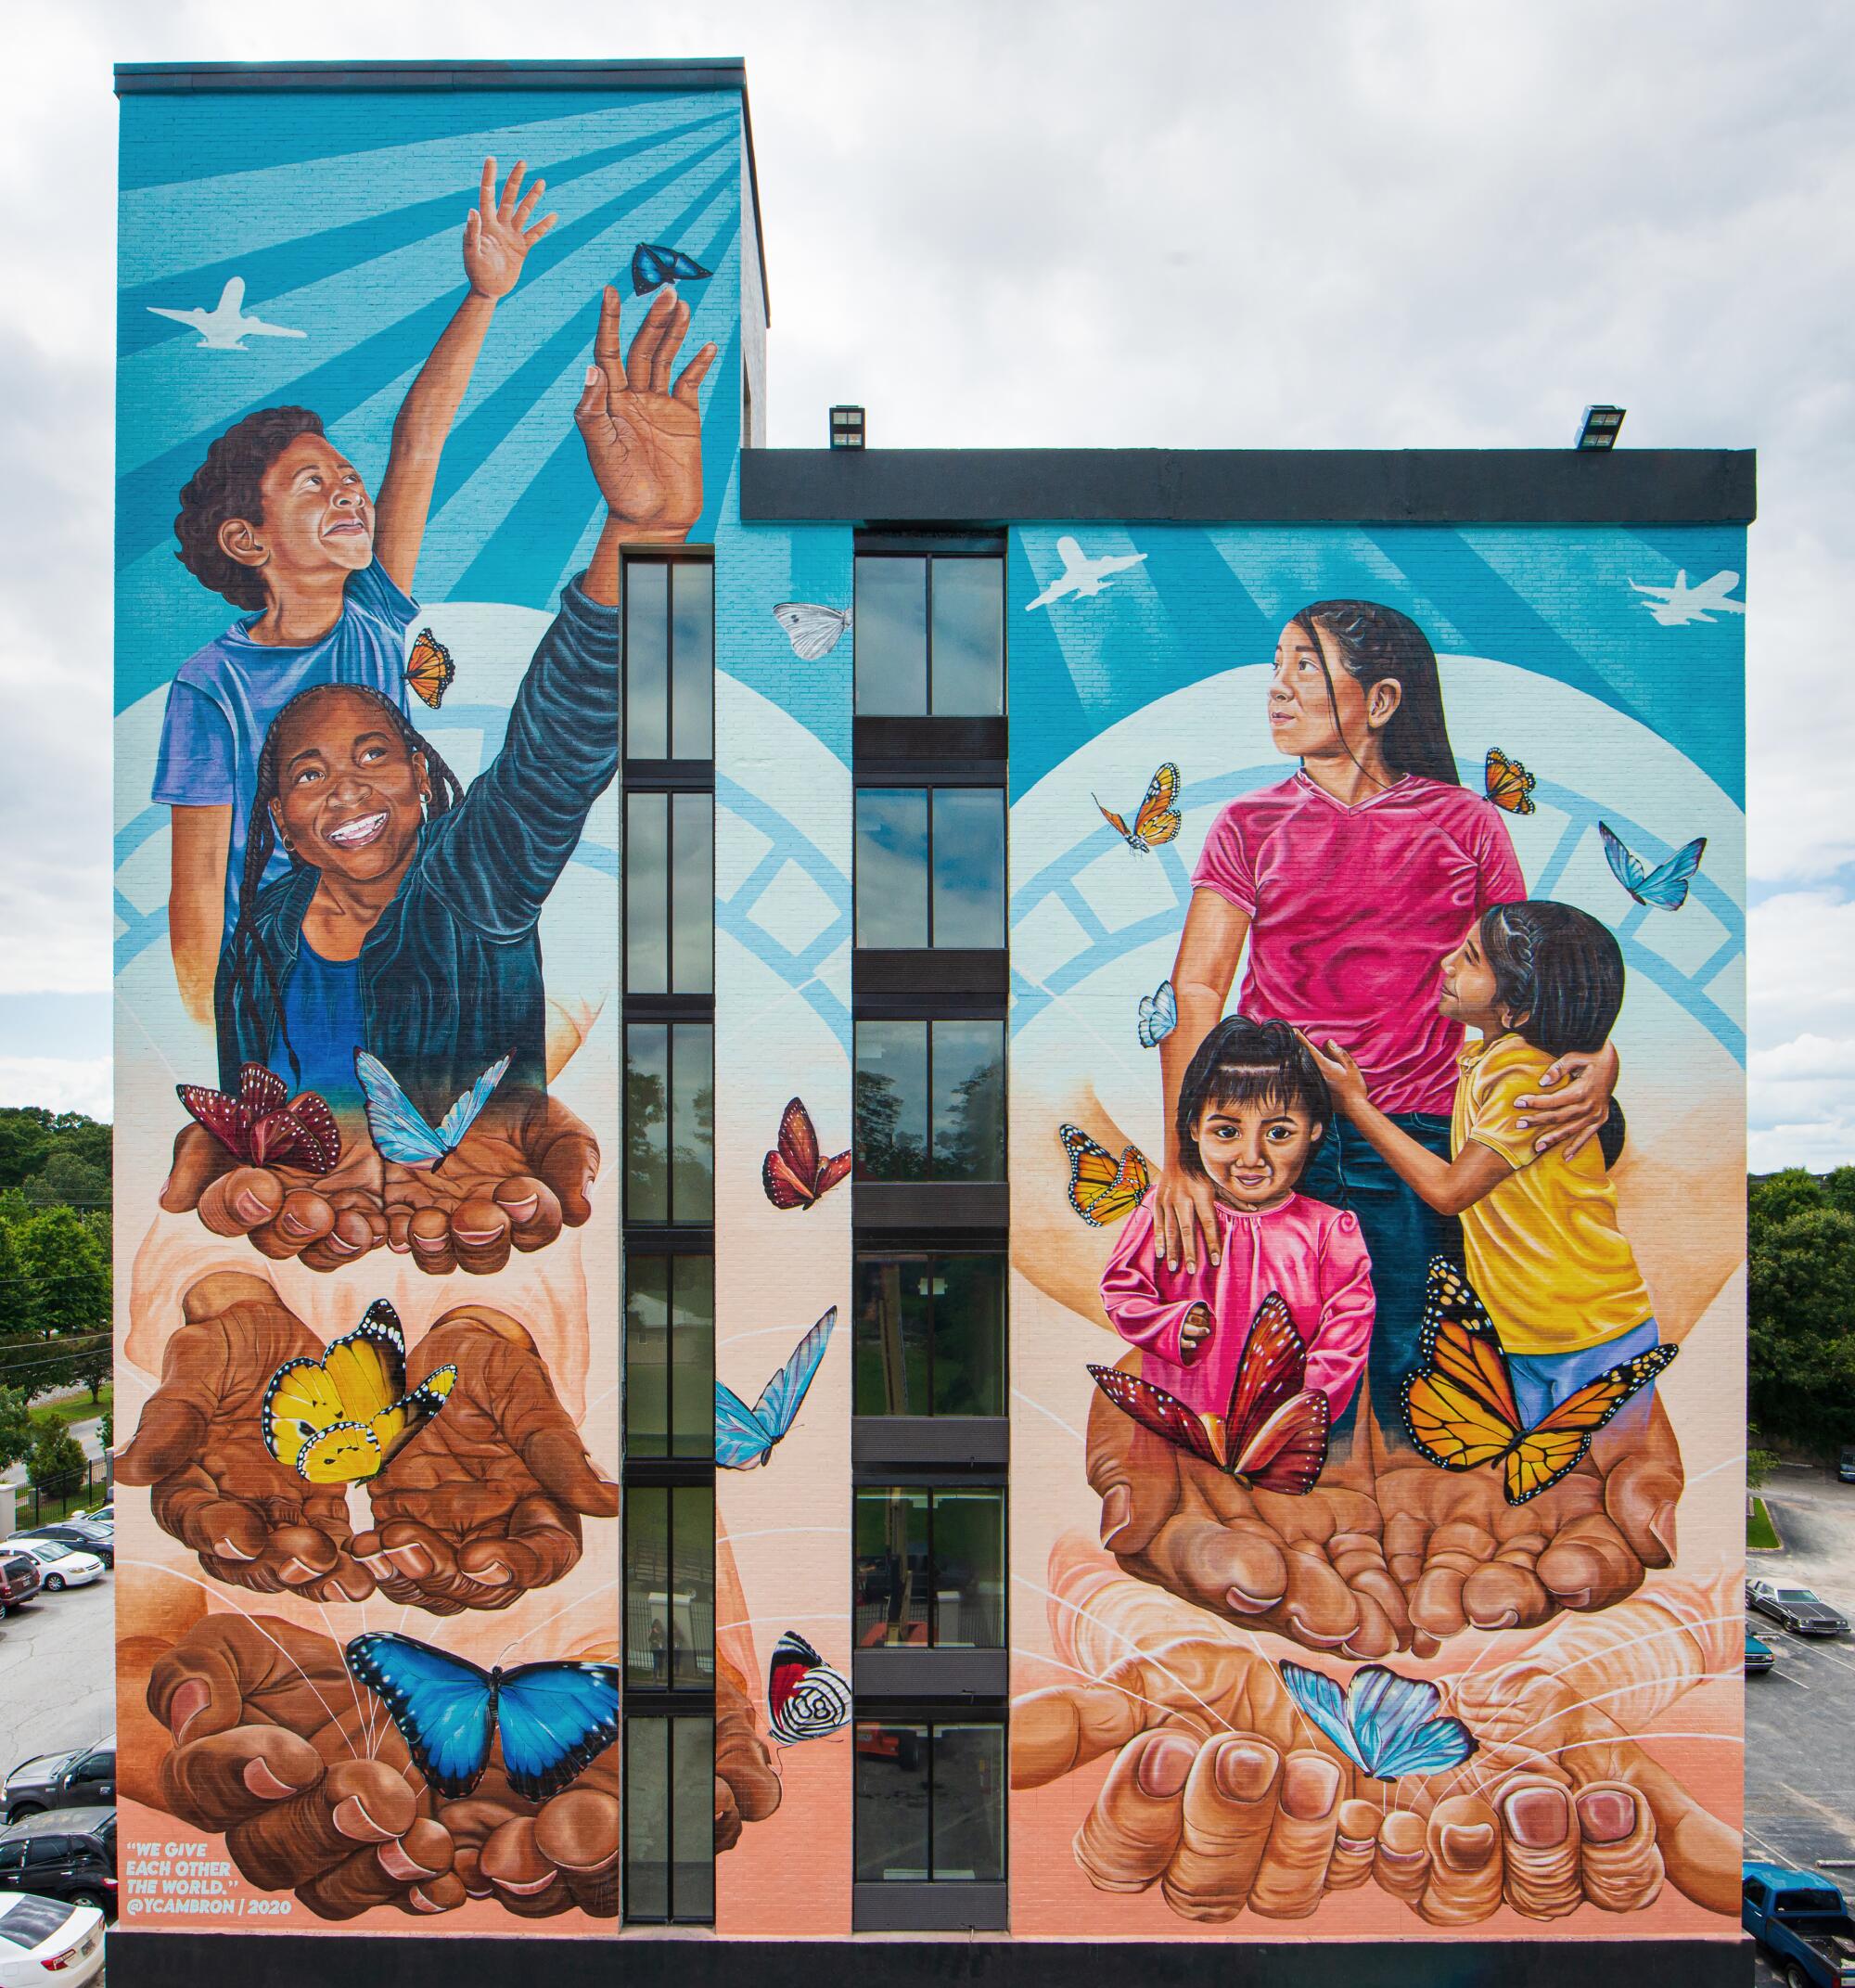 "We Give Each Other the World" is a mural inspired by the stories and experiences of people who live in Hapeville, Ga.